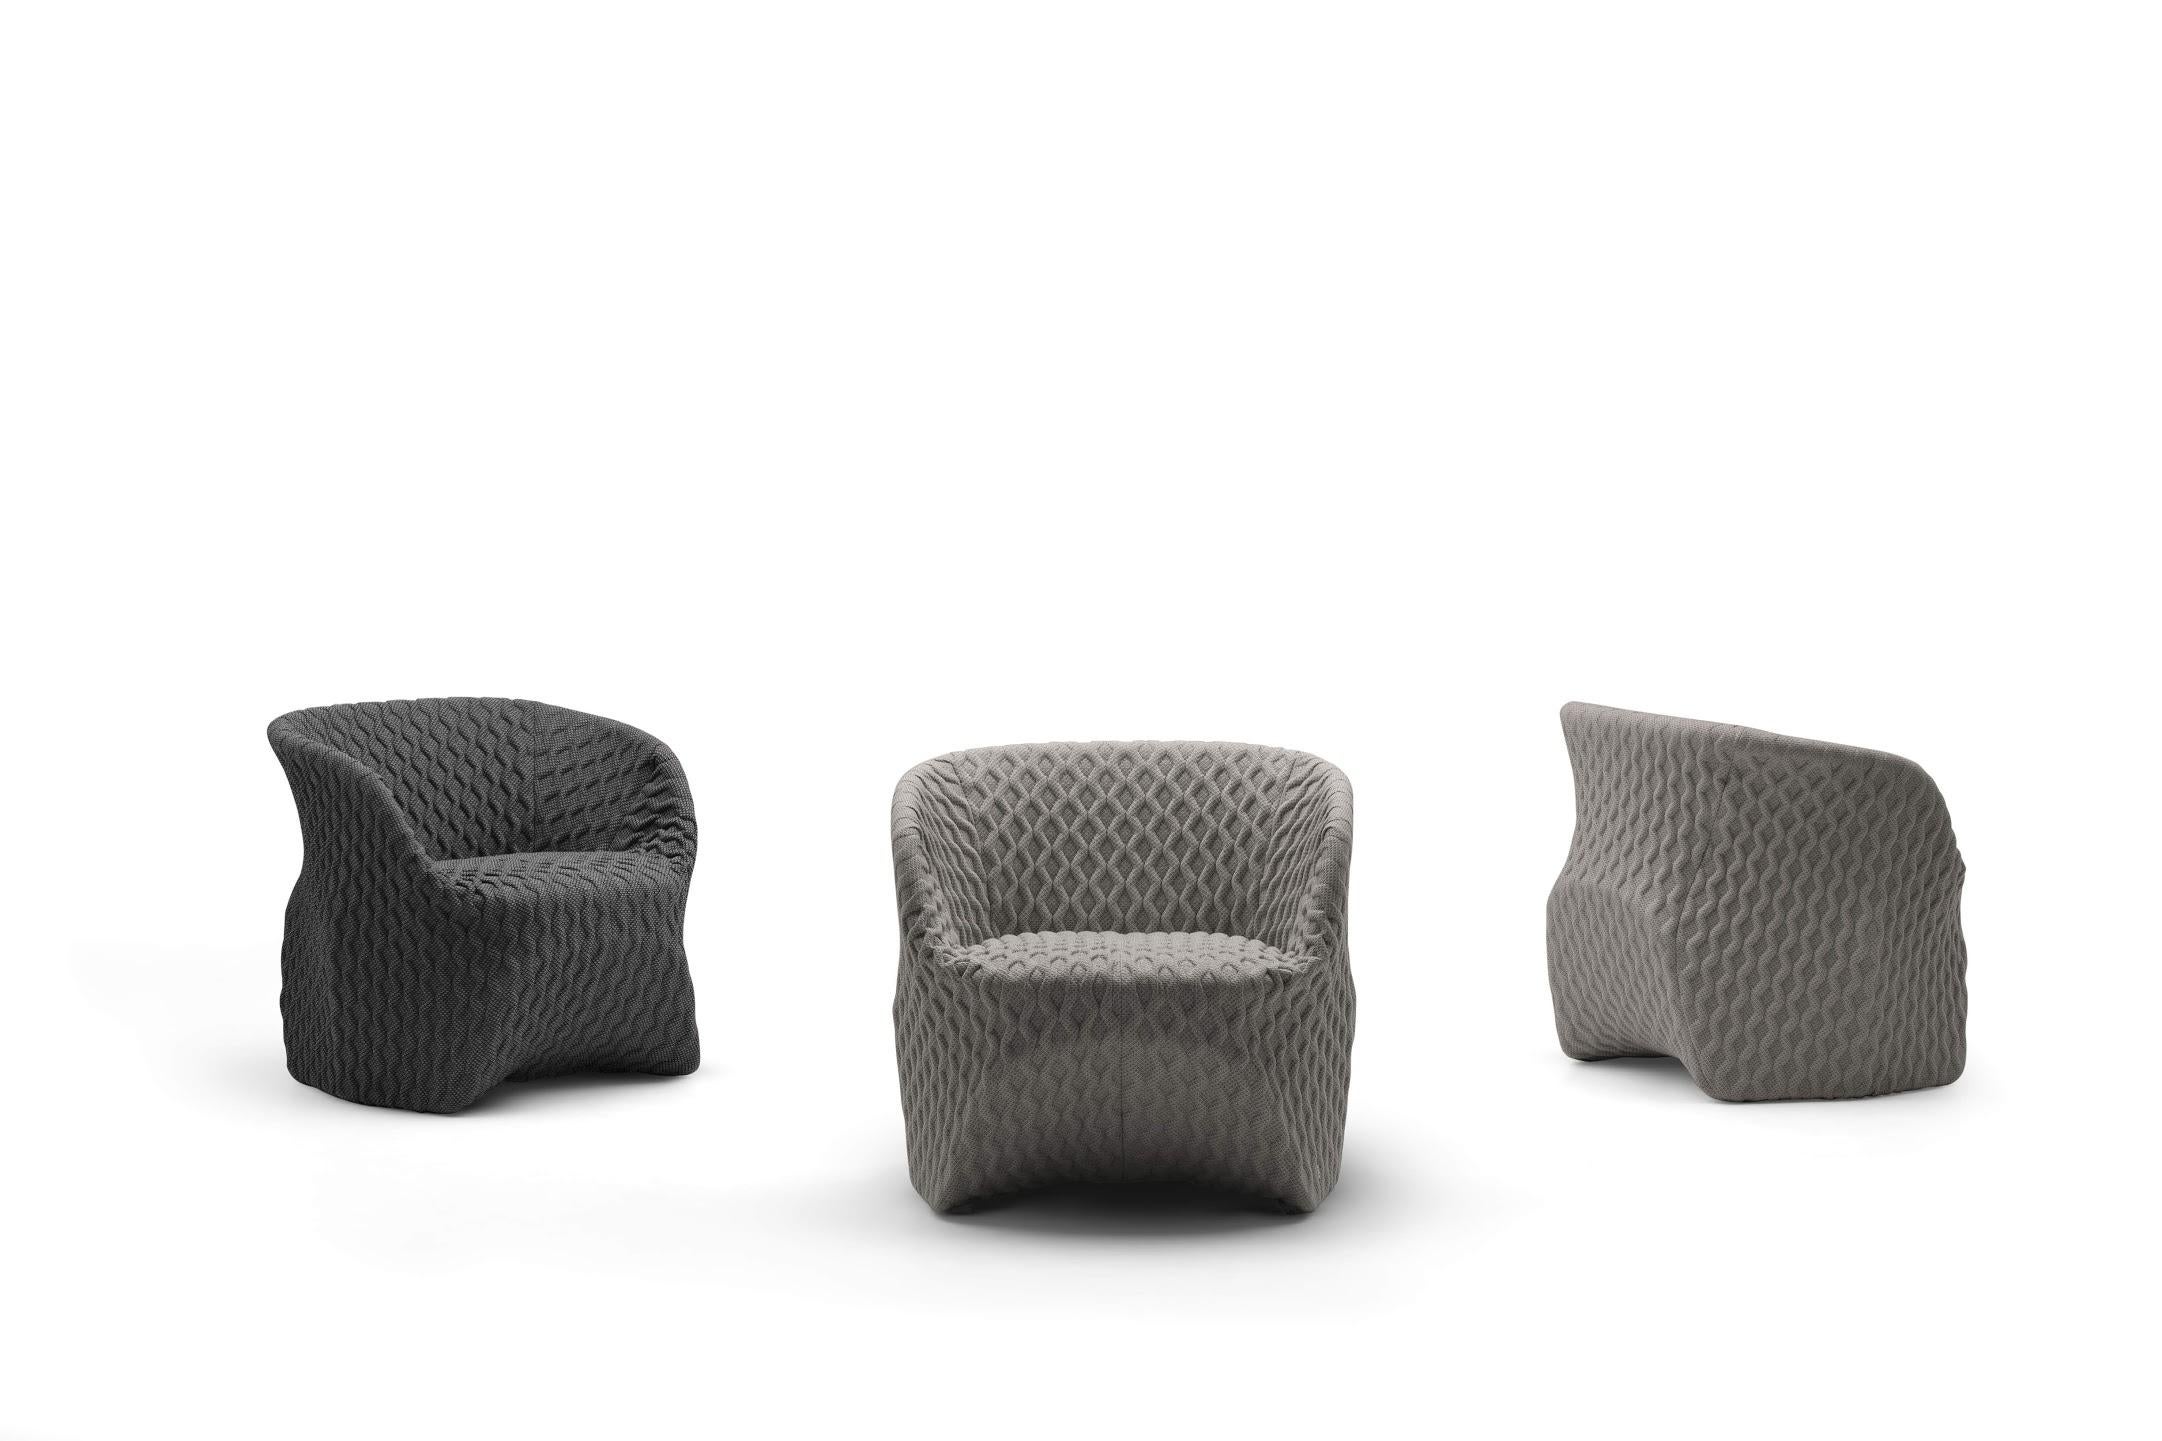 Inspired by the historical generation of products from Falkland to Fiocco, UMA consists of a metal structure on which the fabric is laid, giving shape and volume. An upholstered, not upholstered armchair. The fabric is the distinctive element of